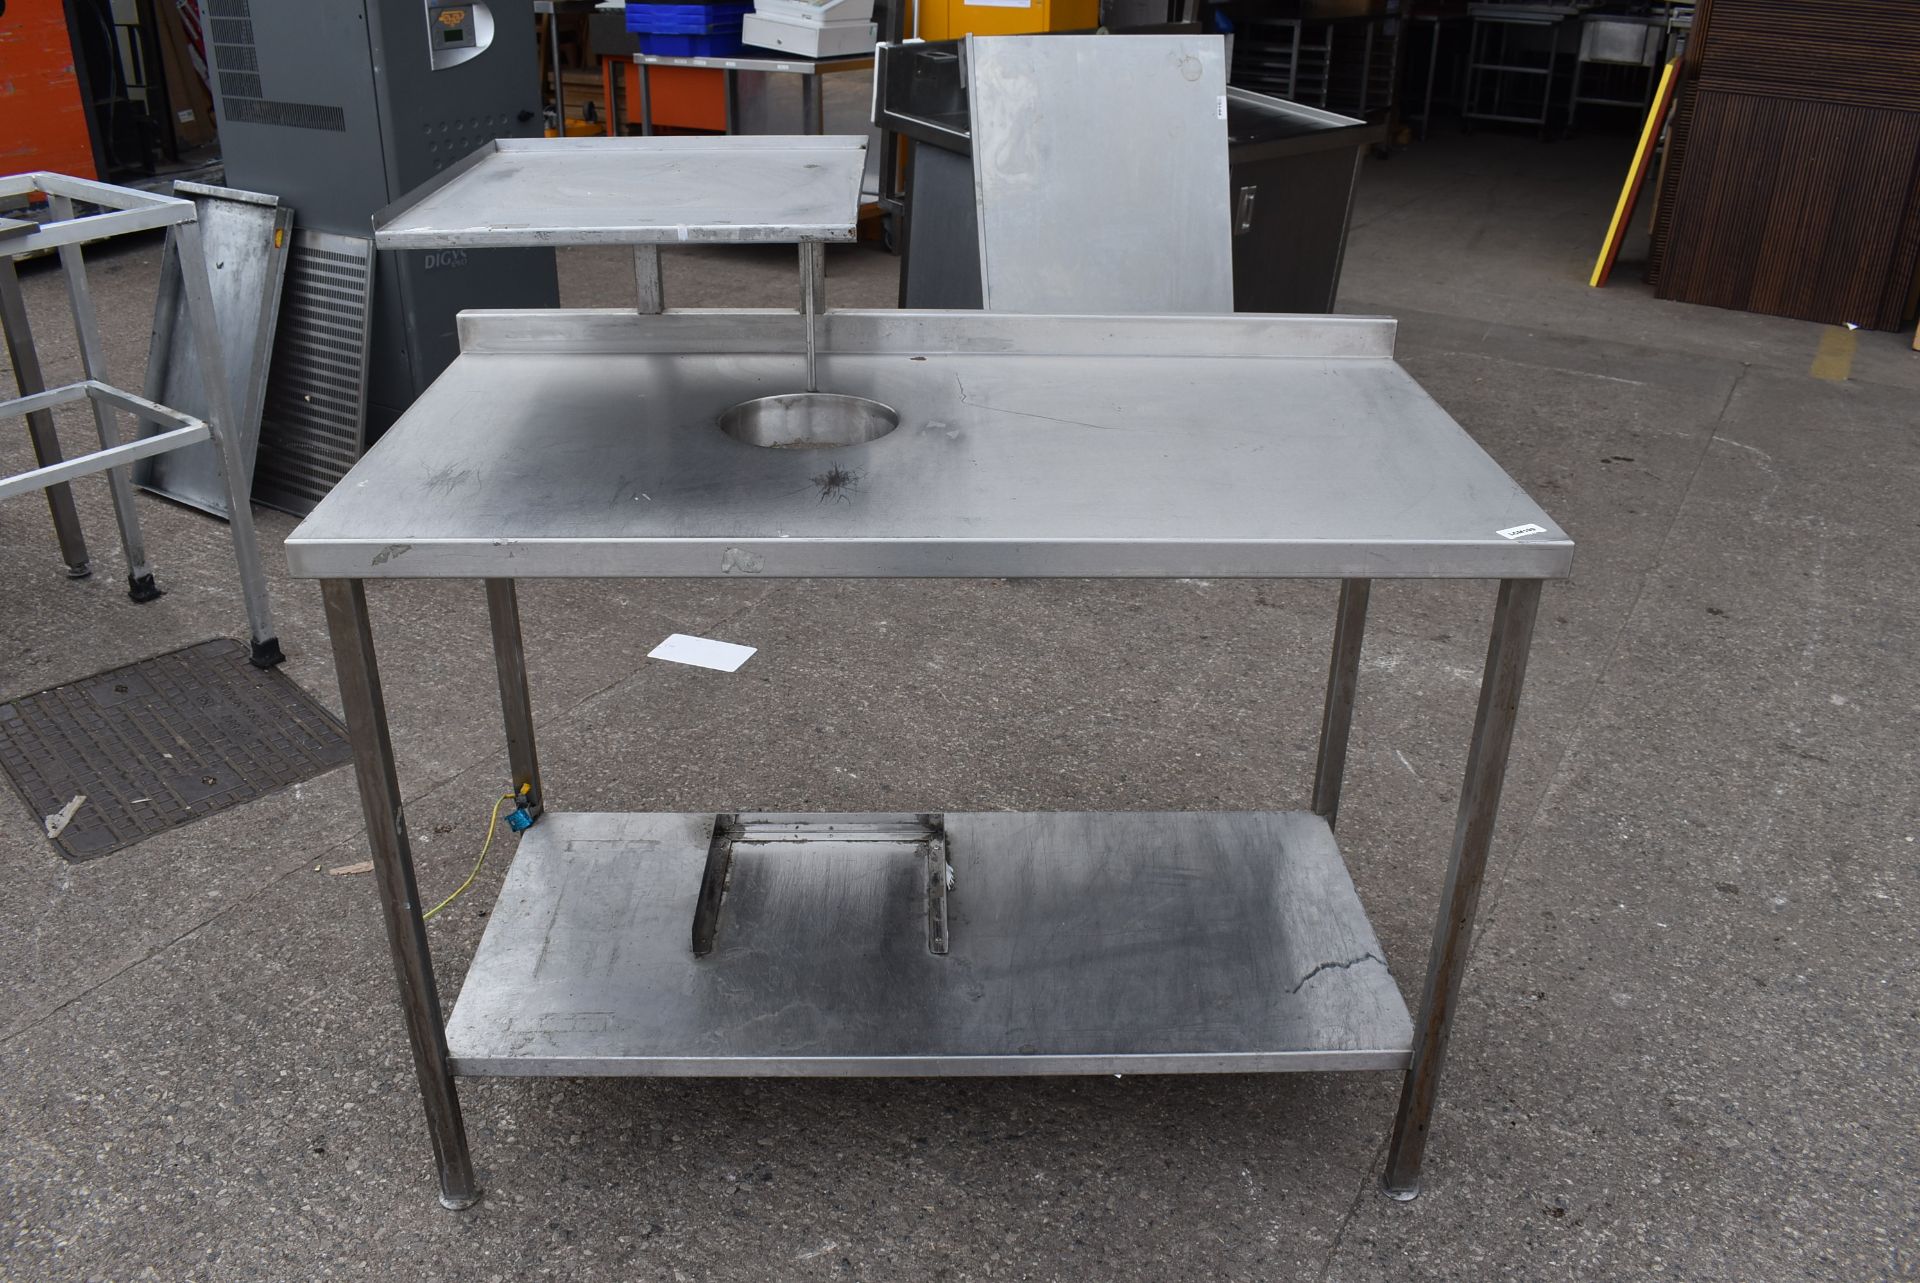 1 x Stainless Steel Workstation With Label Printer Shelf and Bin Chute - Dimensions: H86 x W120 x - Image 2 of 7